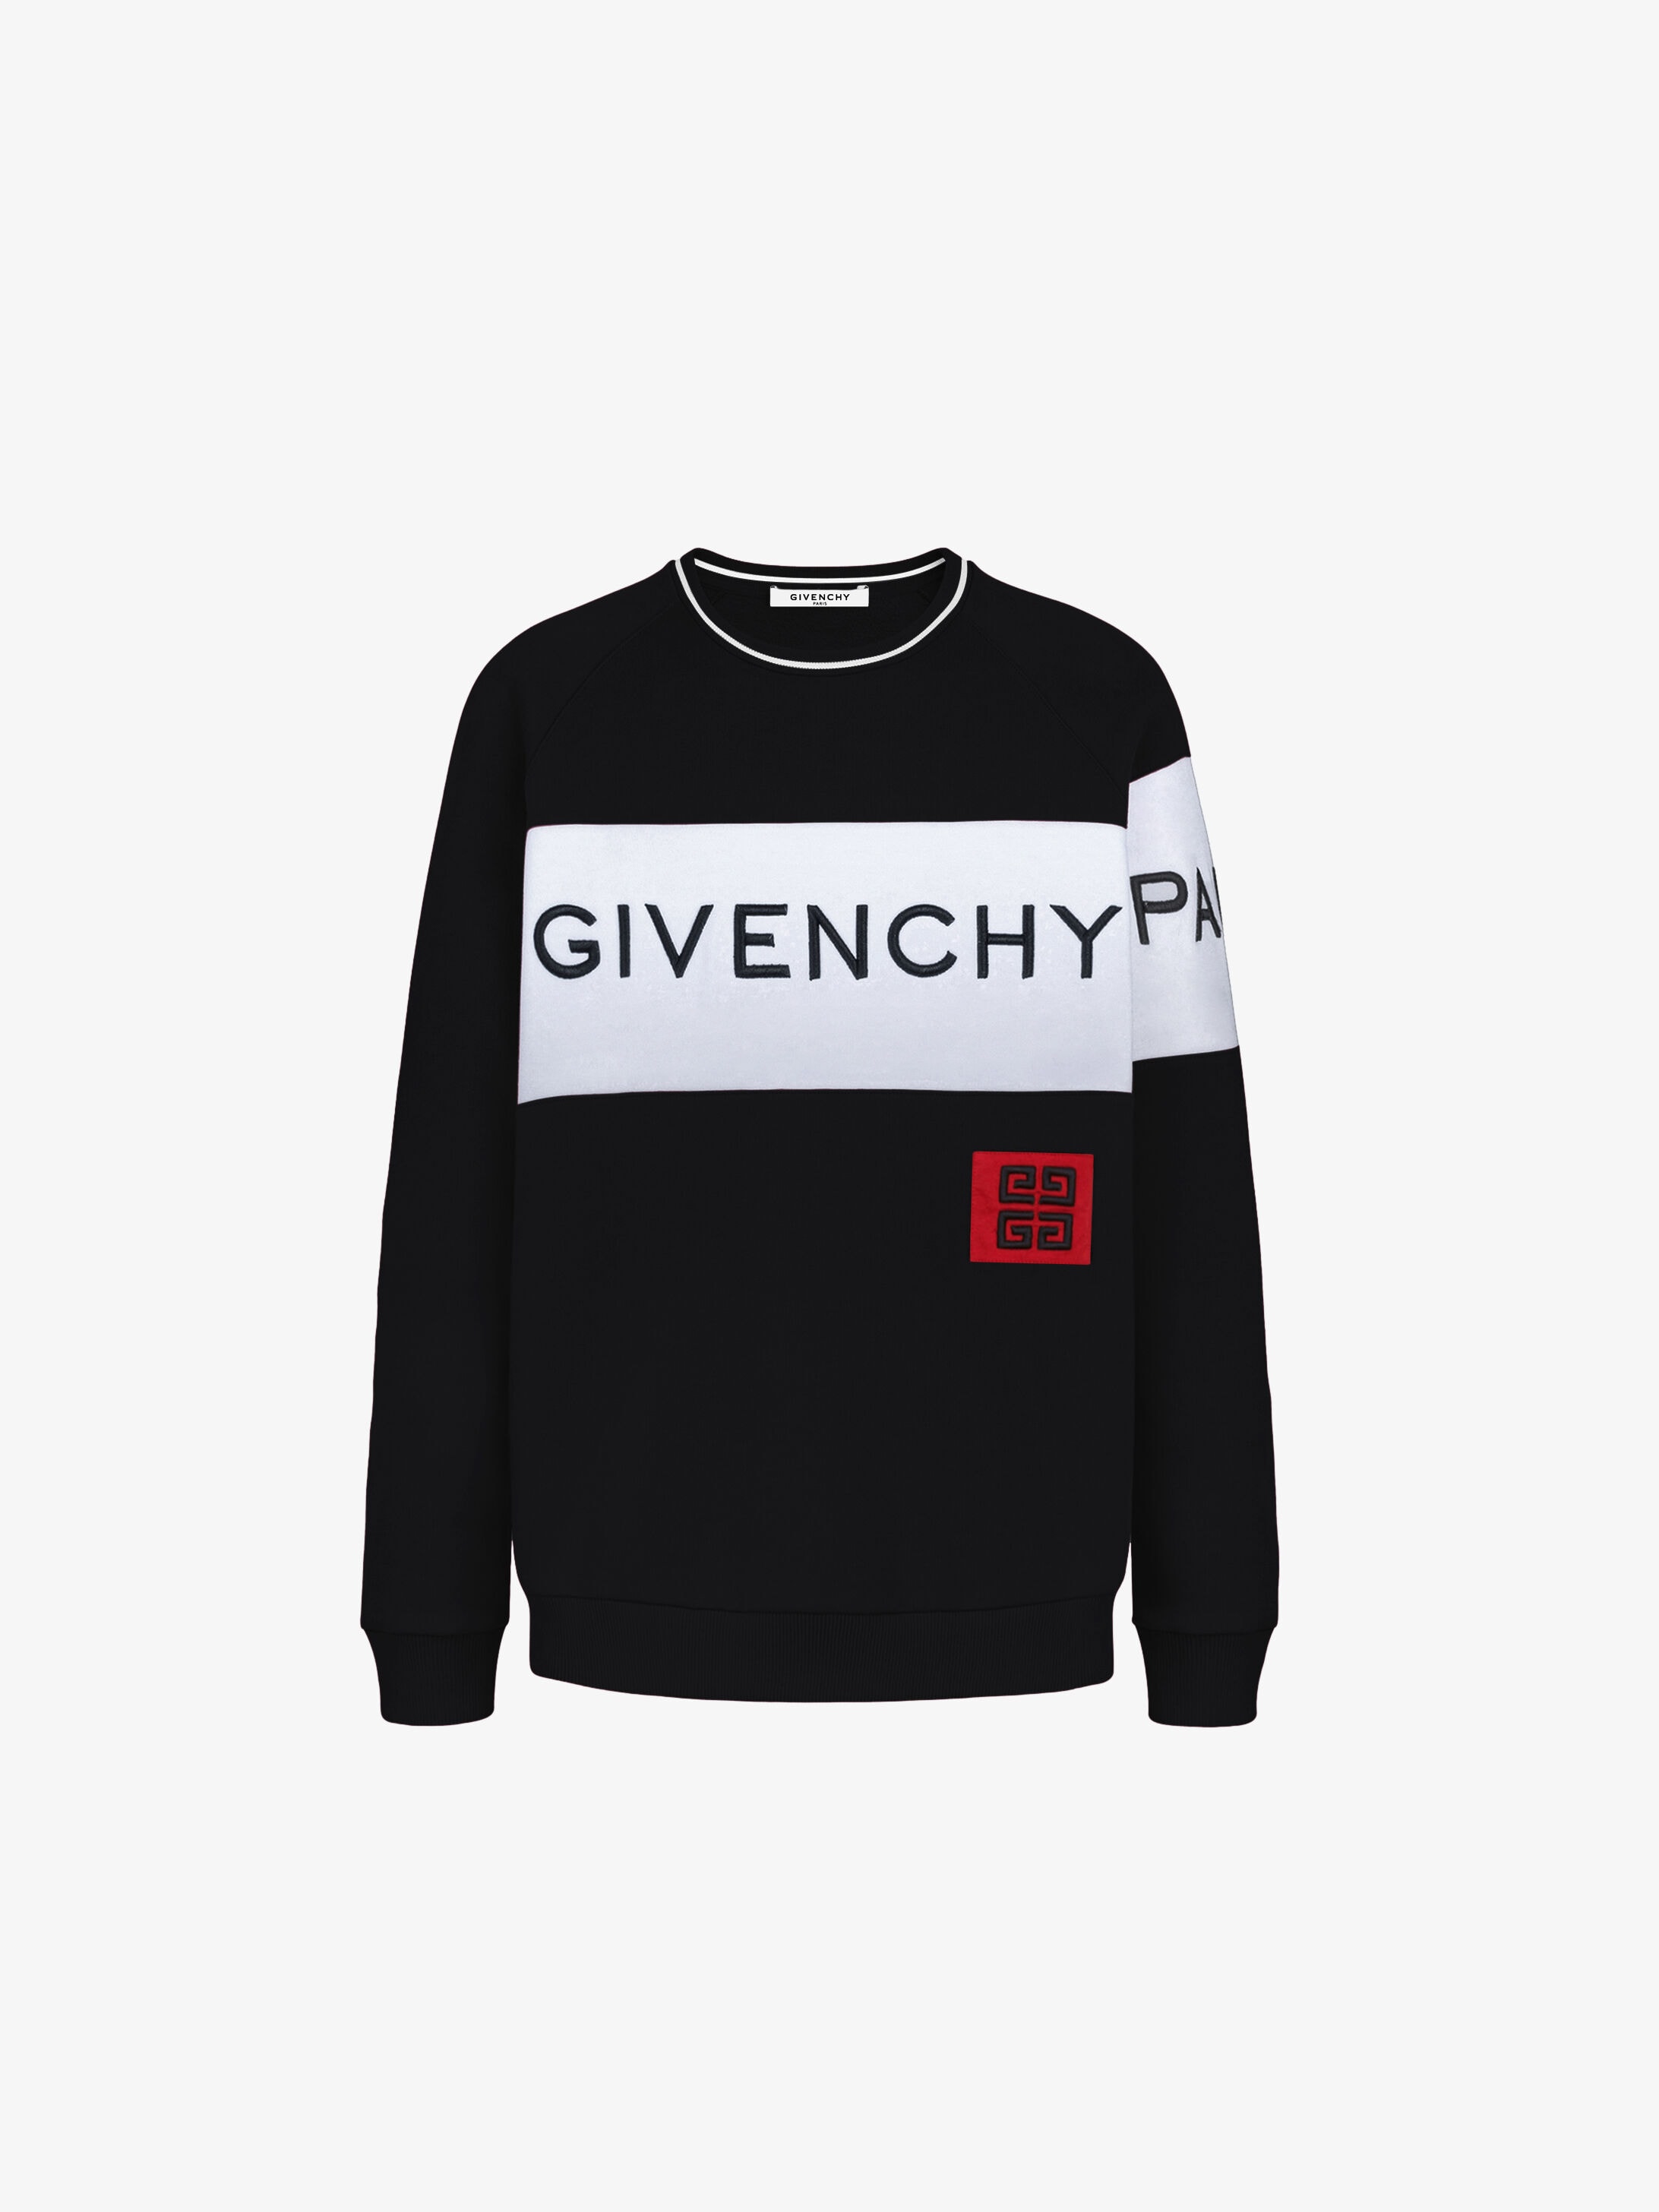 GIVENCHY PARIS 4G embroidered 